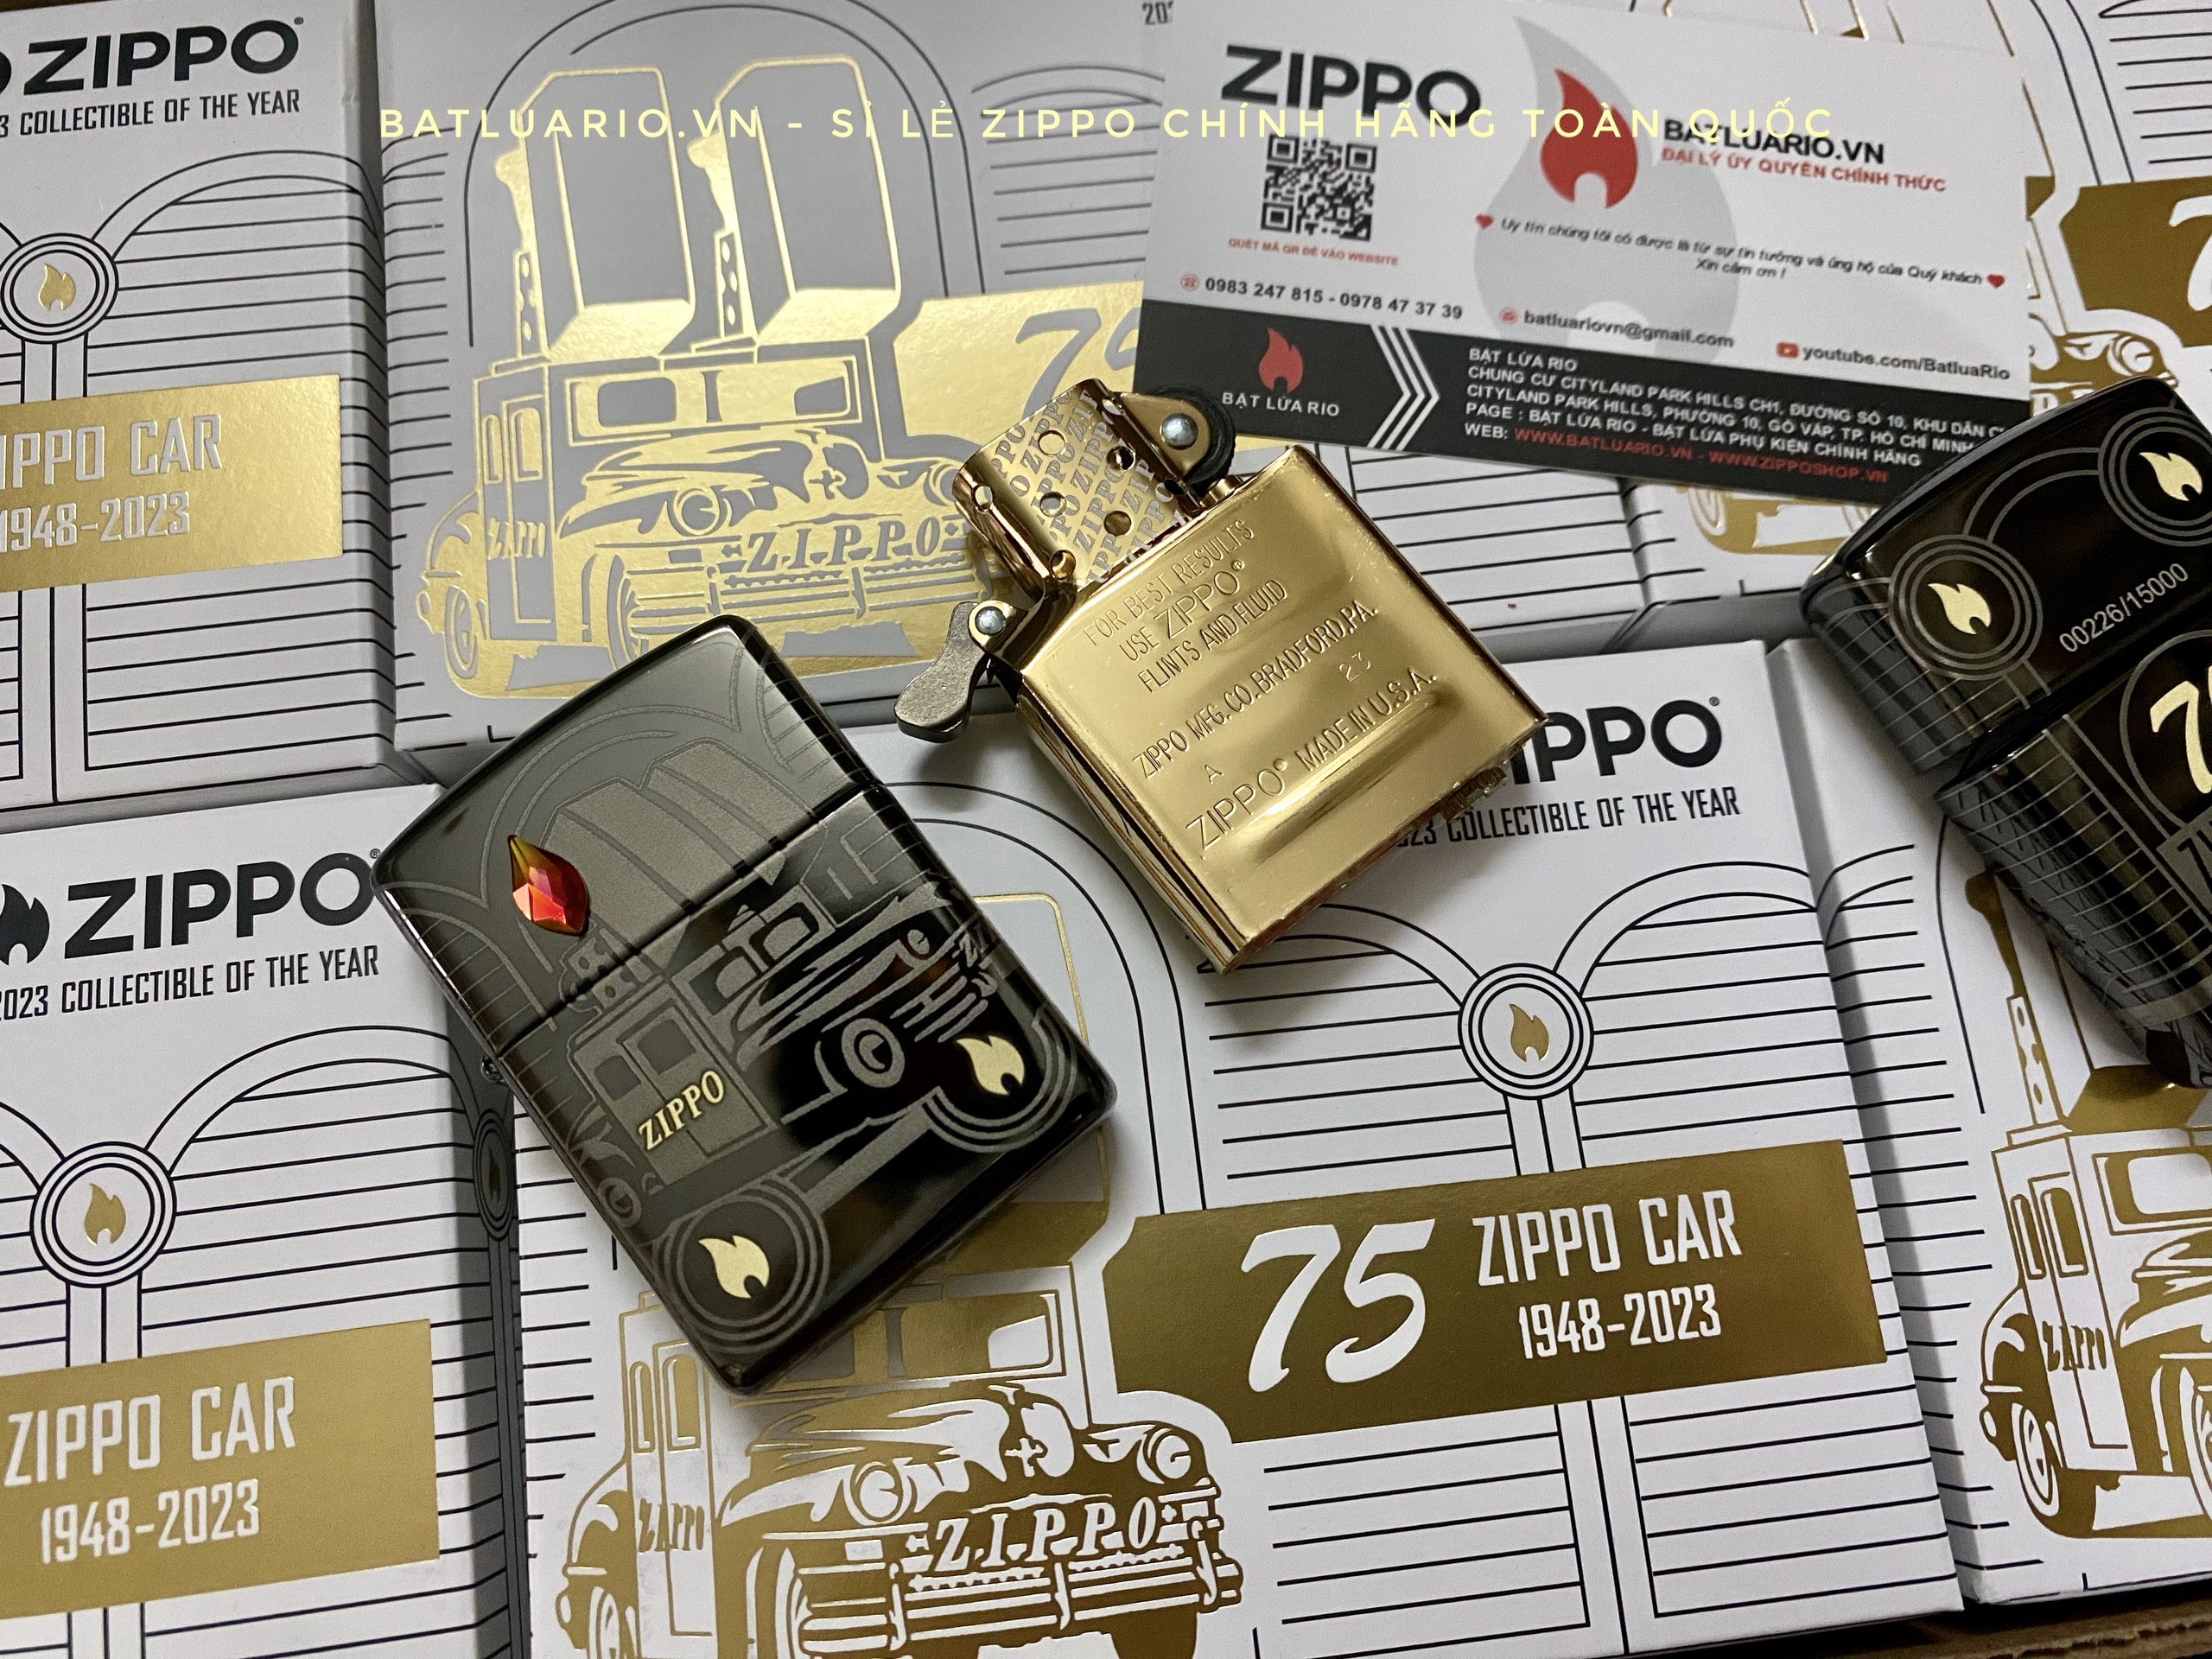 Zippo 48692 - Zippo 2023 Collectible Of The Year - Zippo Car 75th Anniversary Asia Pacific Limited Edition - Zippo COTY 2023 - Honoring 75 Years Of The Zippo Car 114